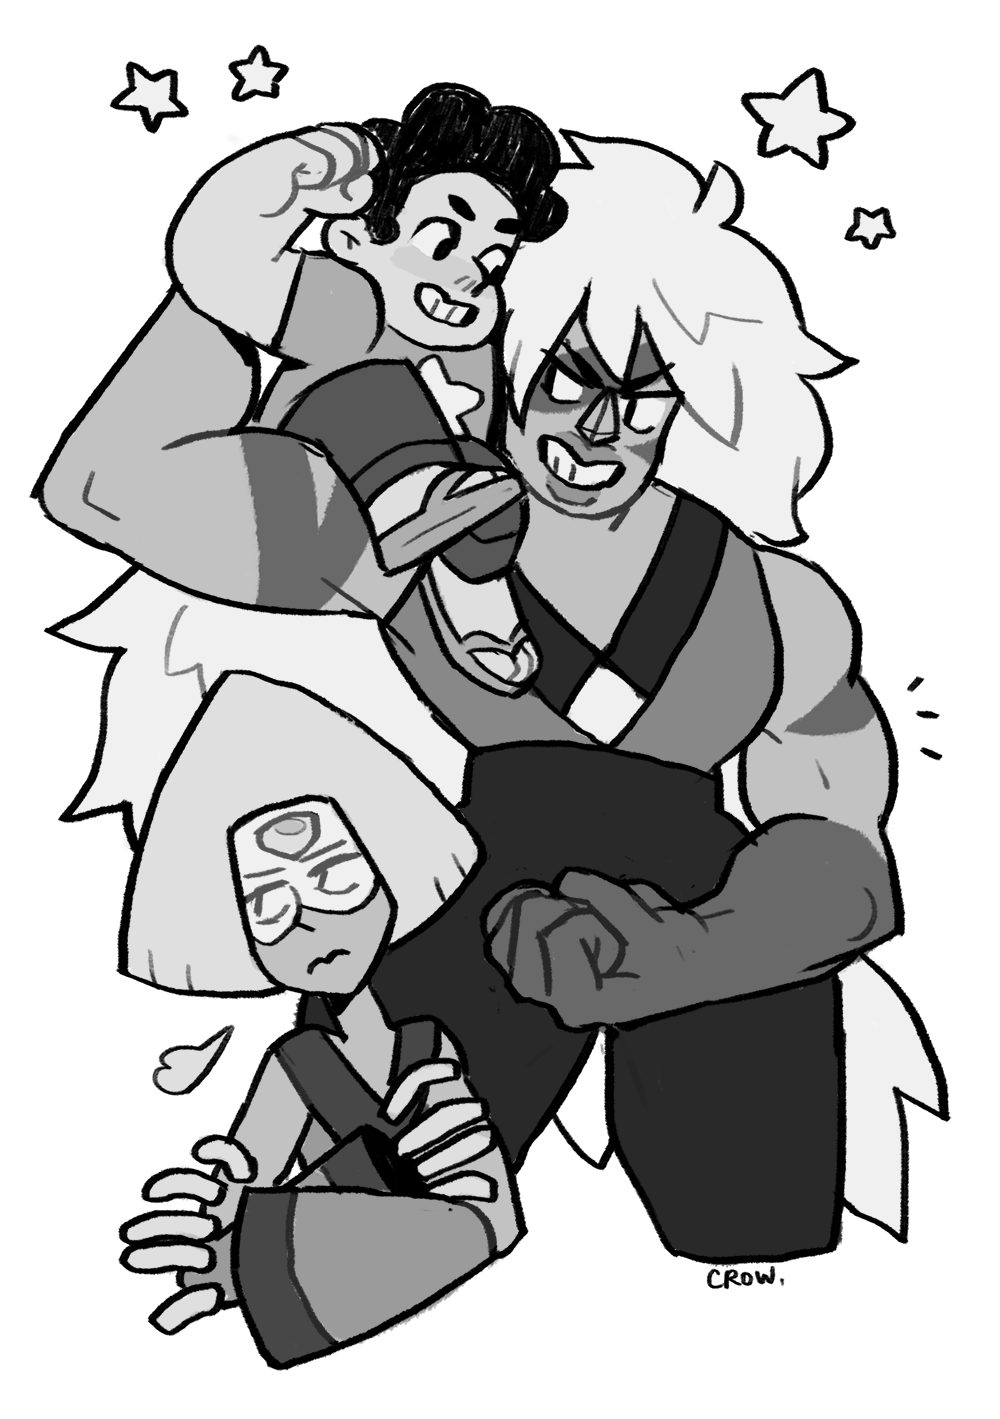 i dont think i ever uploaded this, but i drew this for a small zine that i made. the theme was “cool moms”